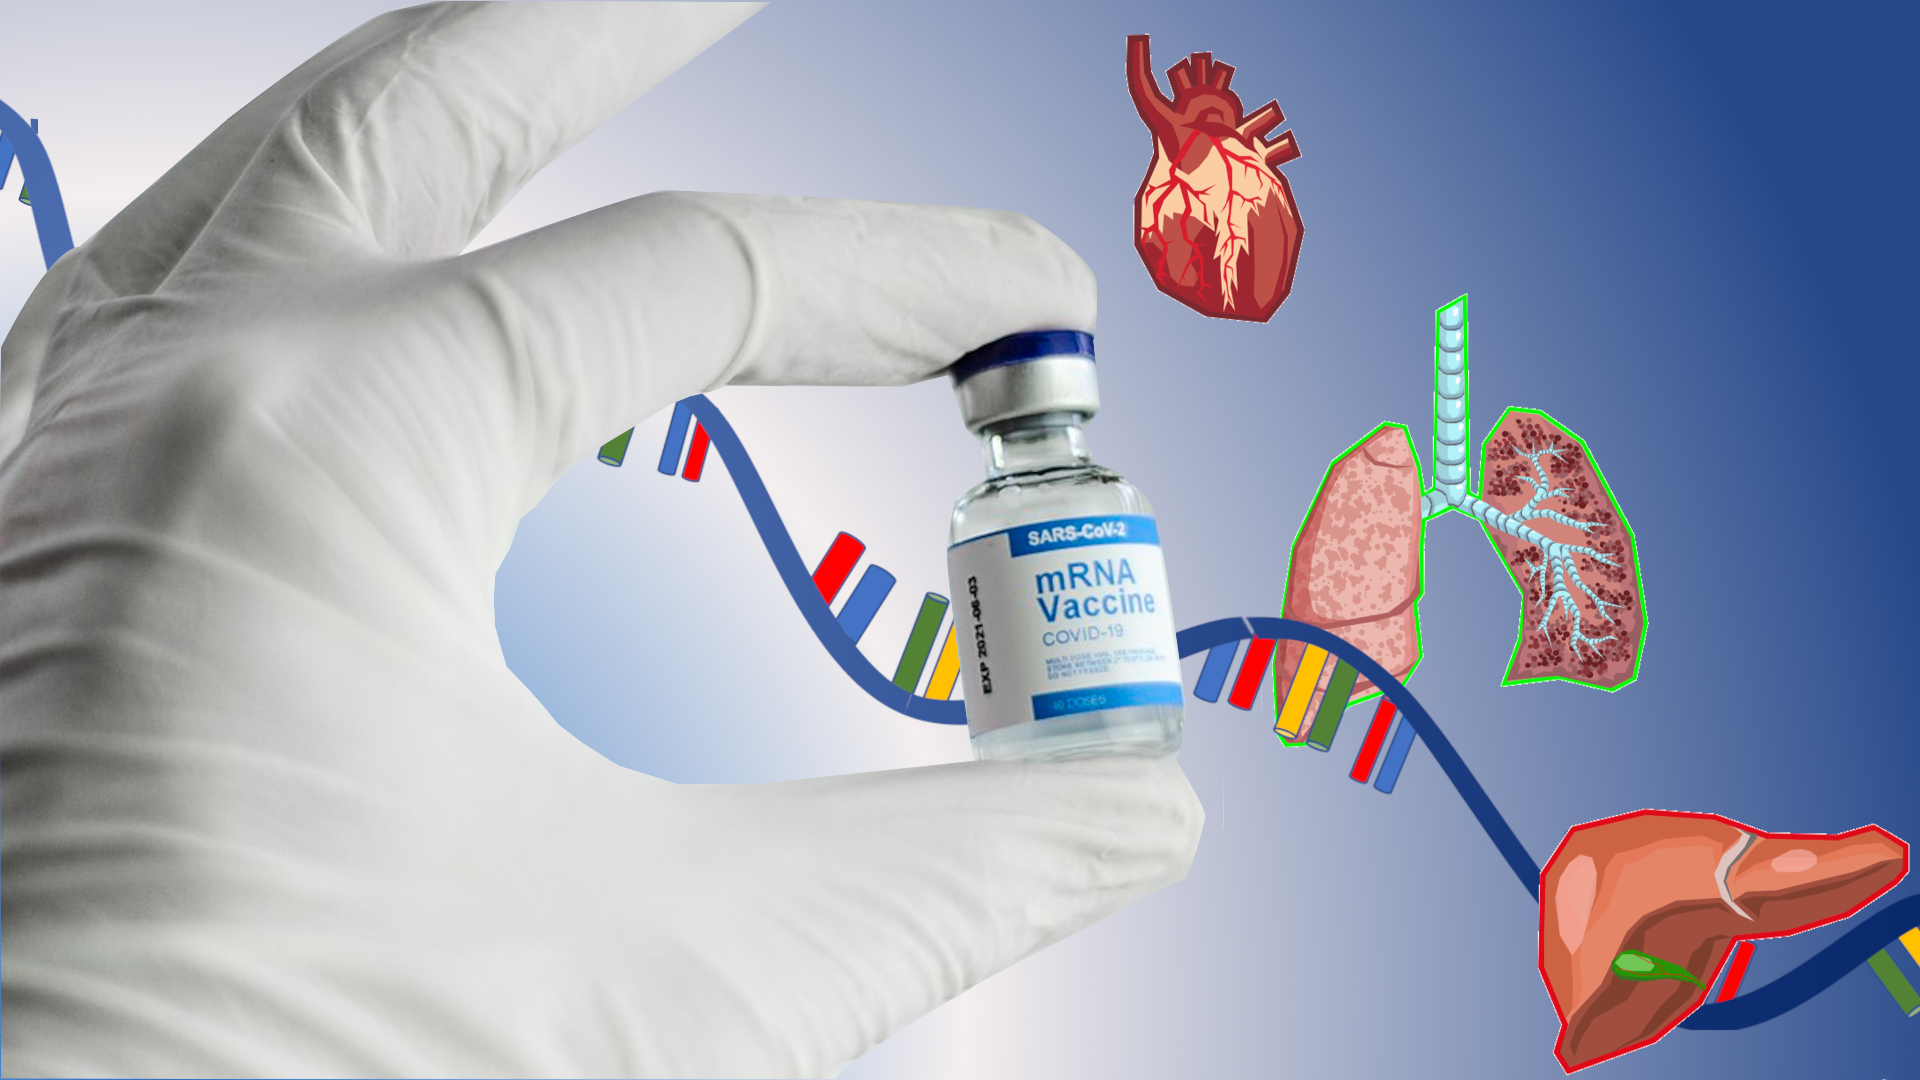 Gloved hand with vaccine has RNA and several organs - heart, lungs, and liver in background